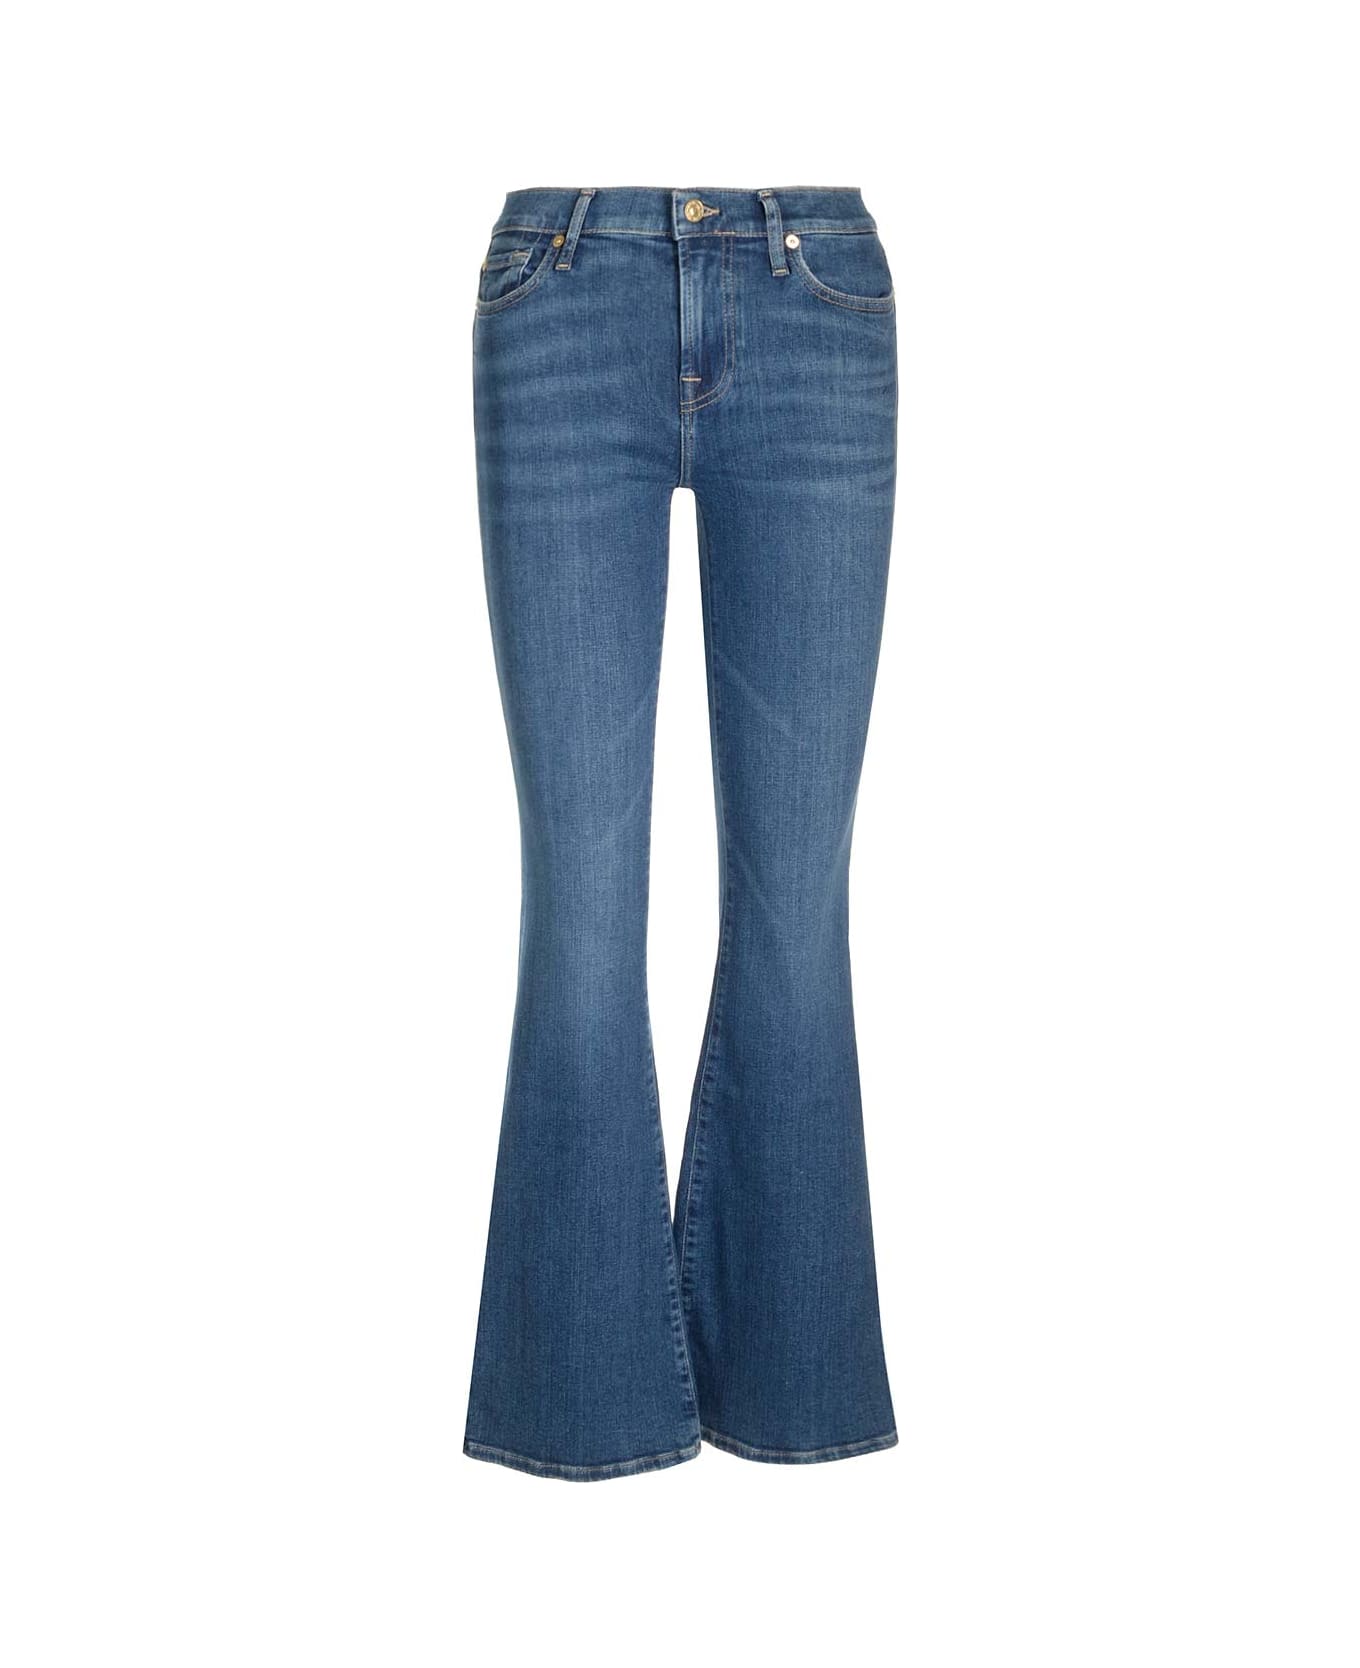 7 For All Mankind 'slim Illusion' Jeans - Blue